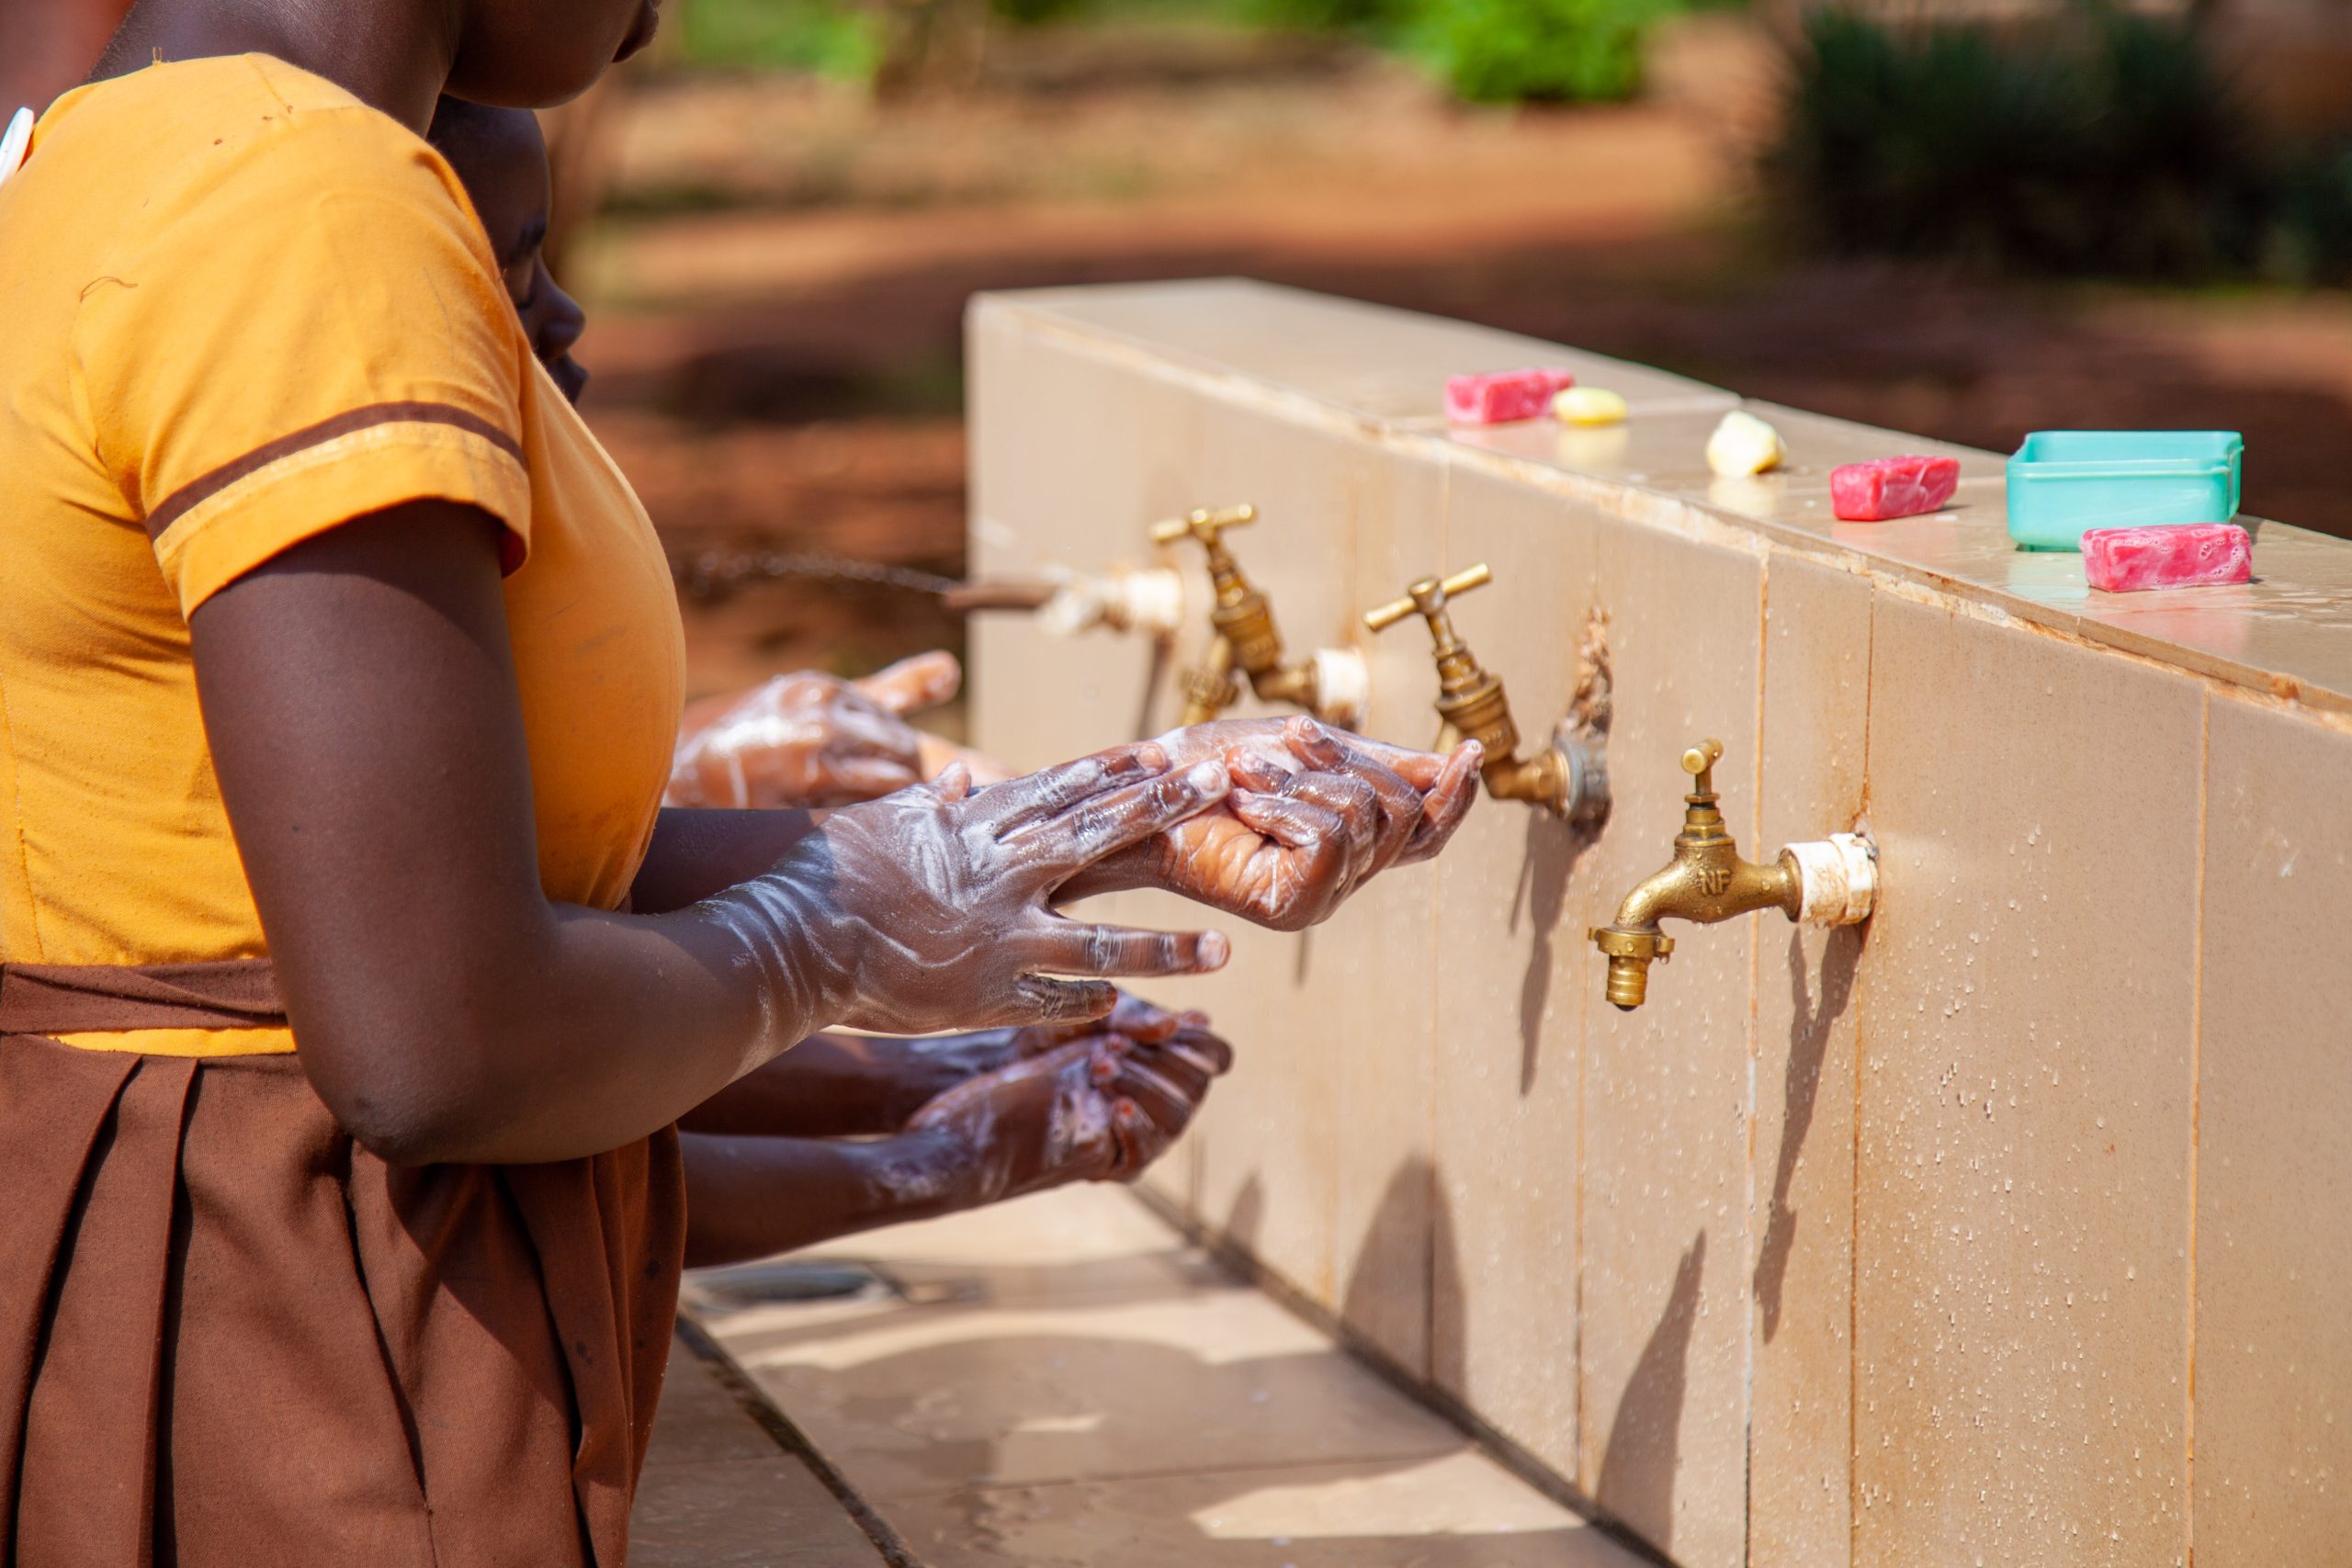 Global Handwashing Day 2023; “Clean hands are within reach”